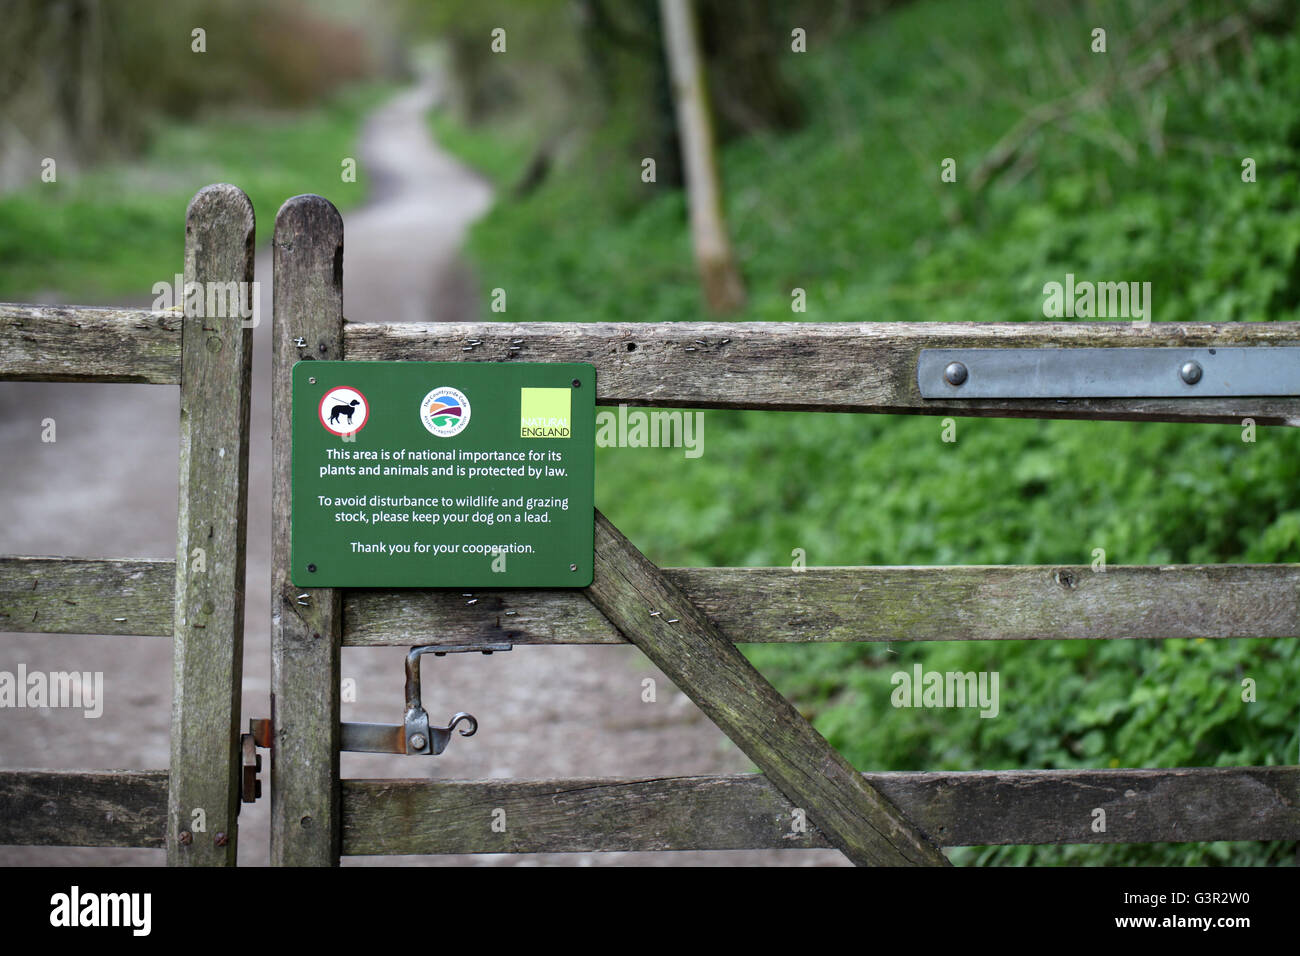 Footpath through the National Nature Reserve at Lathkill Dale in the Derbyshire Peak District National Park Stock Photo